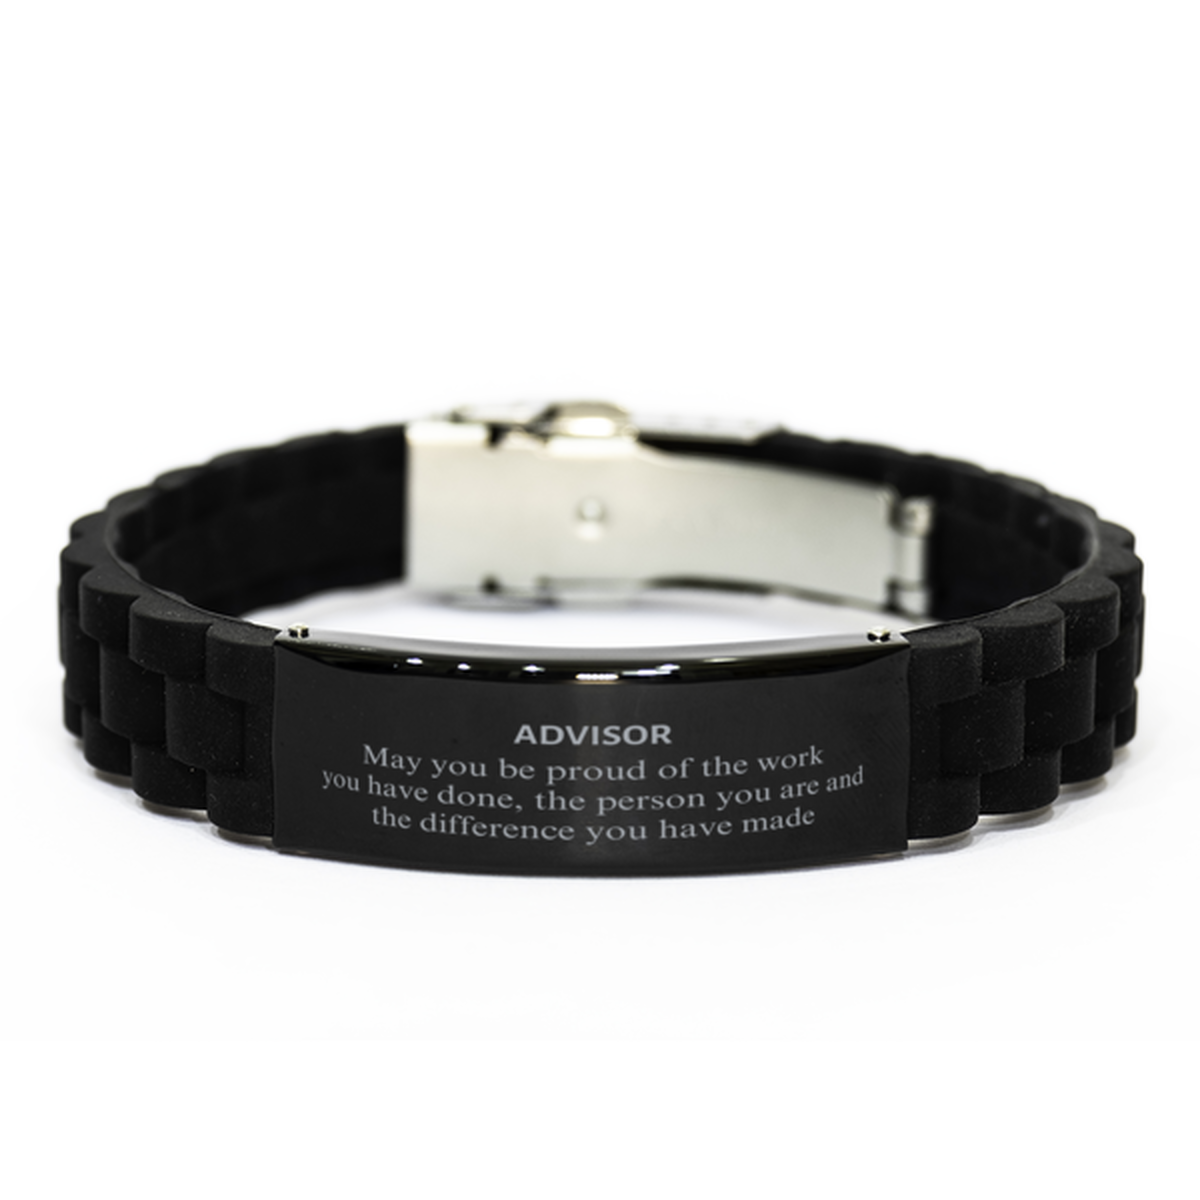 Advisor May you be proud of the work you have done, Retirement Advisor Black Glidelock Clasp Bracelet for Colleague Appreciation Gifts Amazing for Advisor